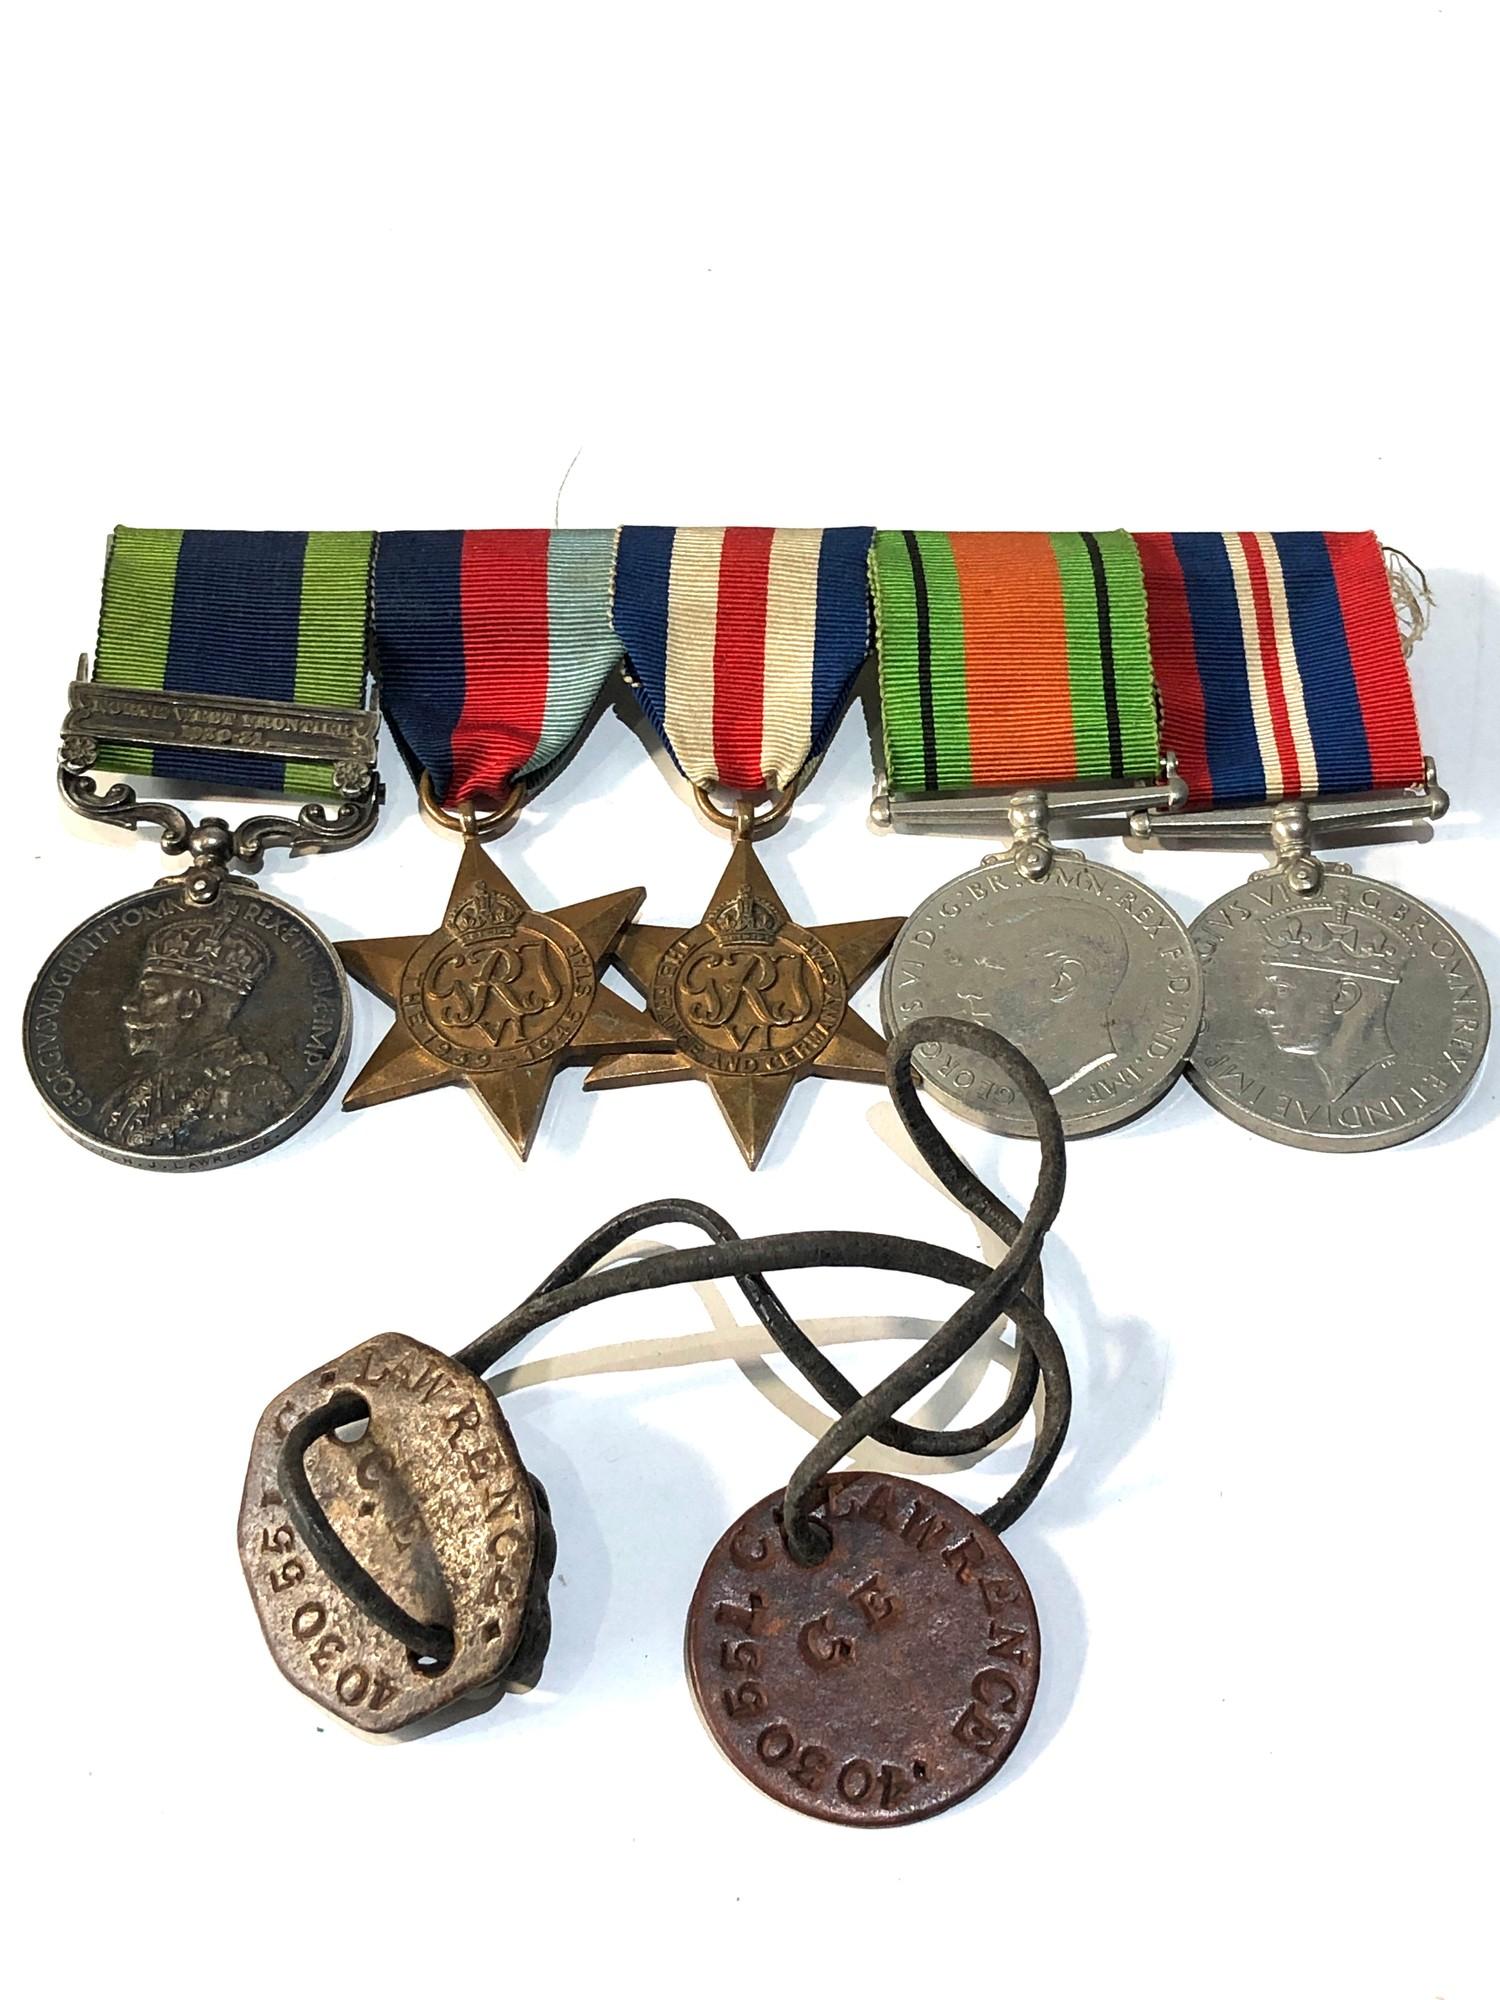 I.G.S WW2 medal group mounted and I.D tags the I.G.S north west fronier 1930-31 named 4030051 pte